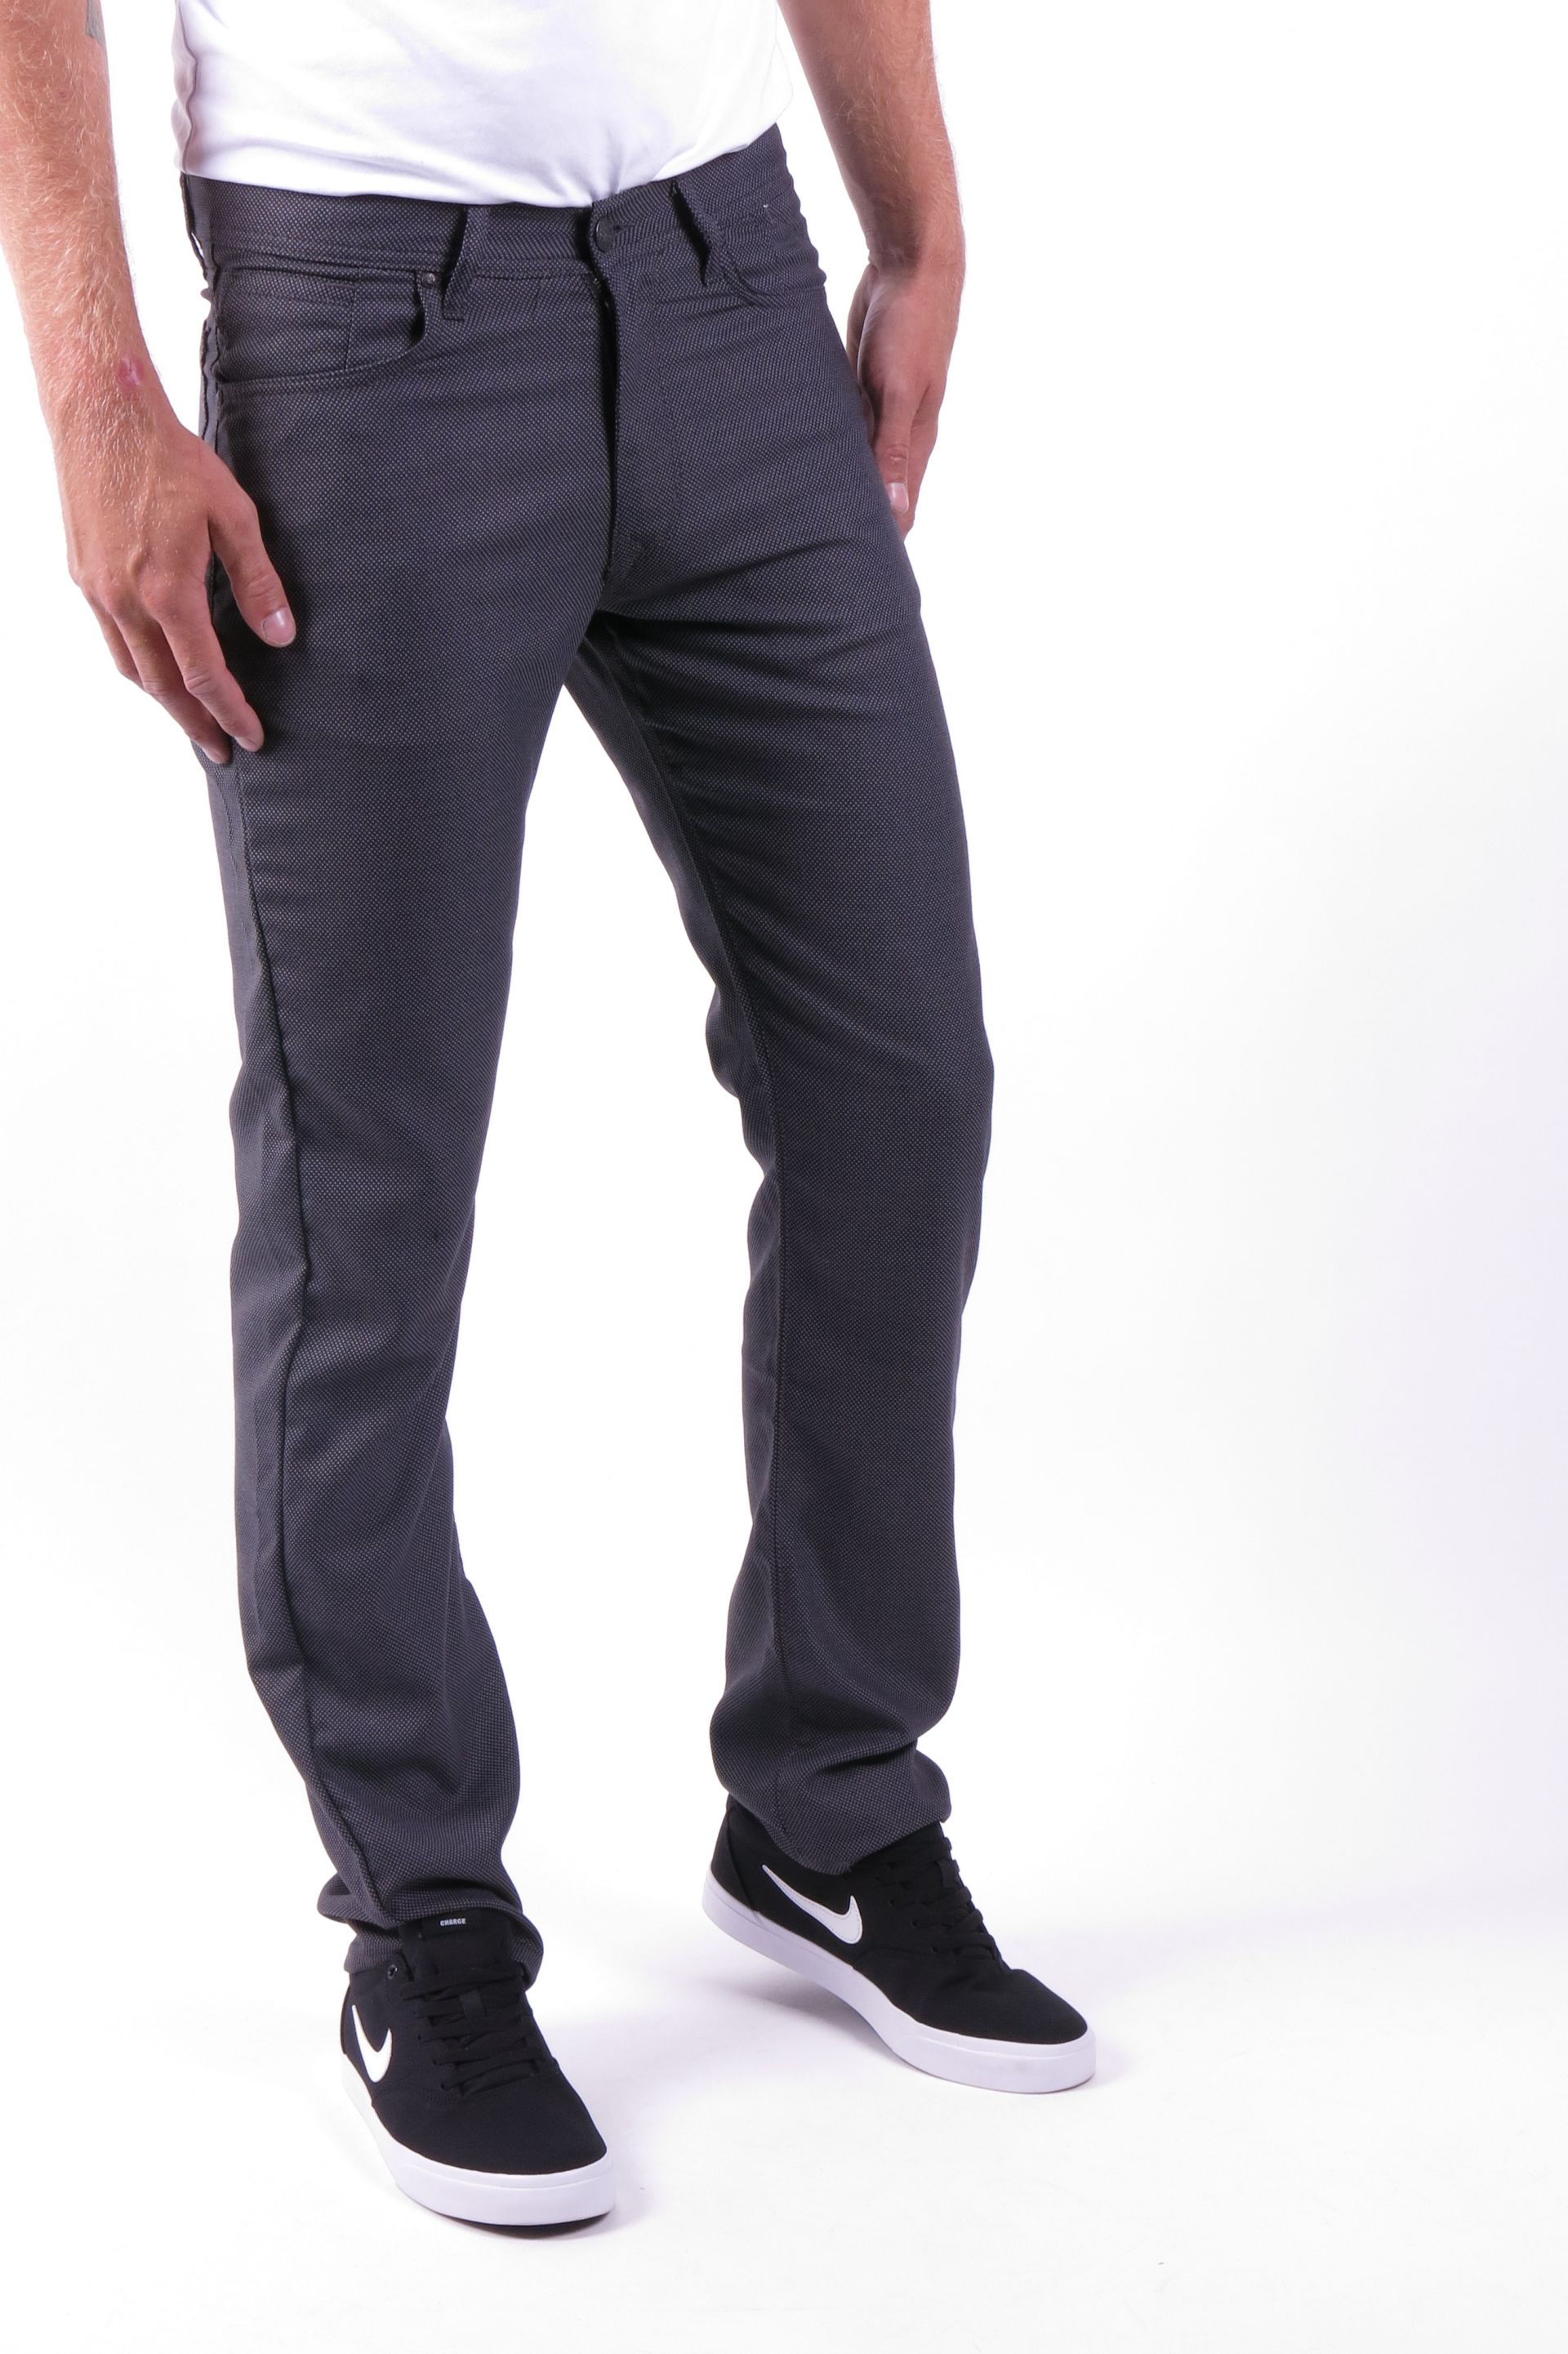 Chino pants BLK JEANS 7898-902-102-200